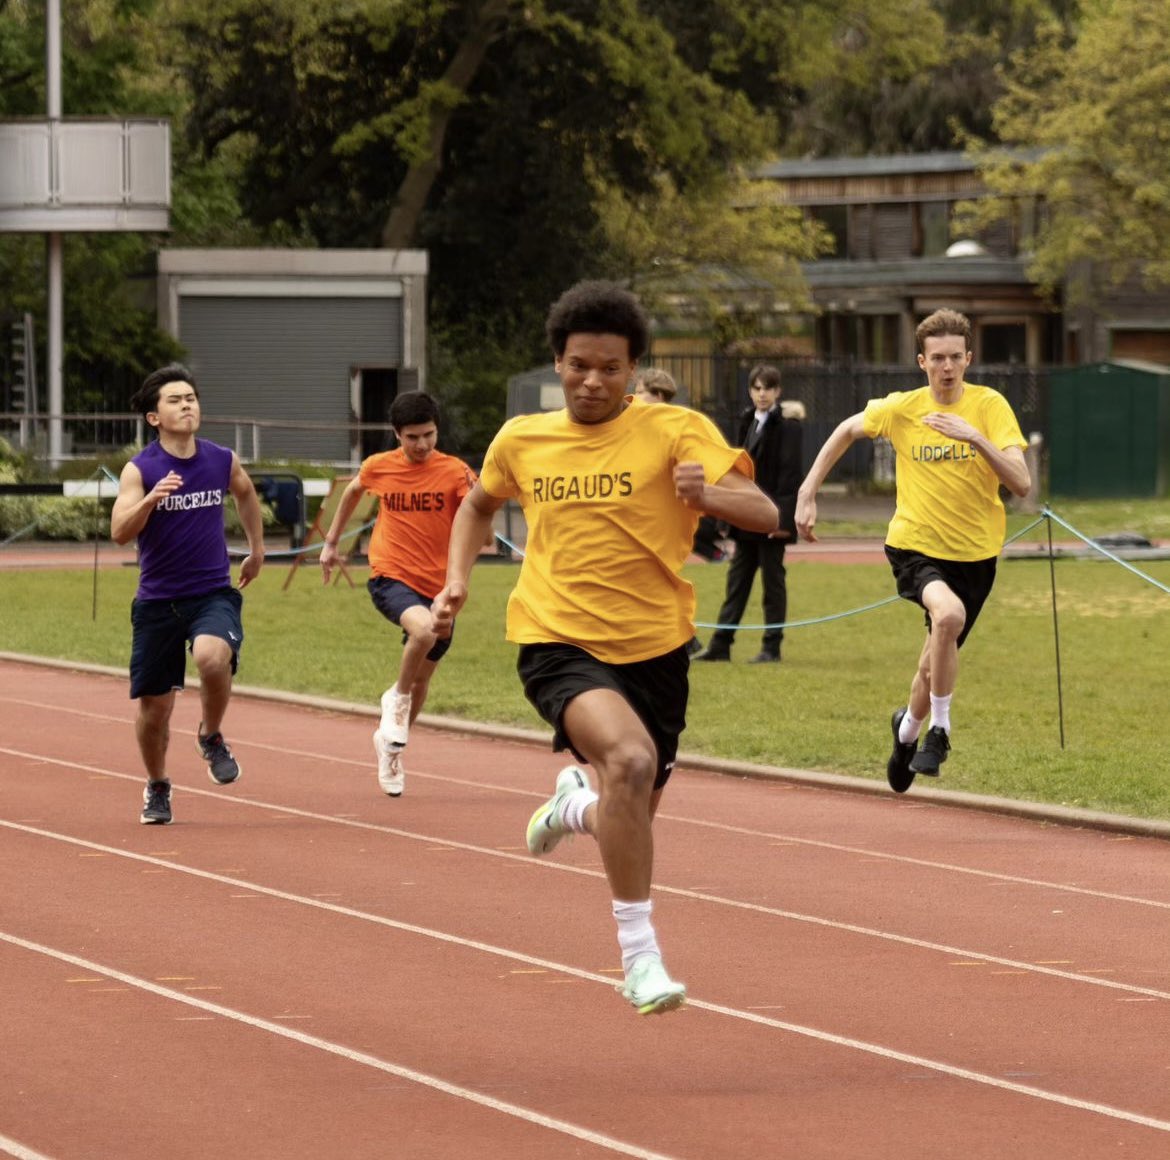 The cold and the rain could not dampen spirits at the @wschool annual Athletics Sports day in Battersea Park. In the overall team event, Grant’s were third behind Rigaud’s in second, but it was Busby’s who maintained their stranglehold winning the title for the 6th year in a row.